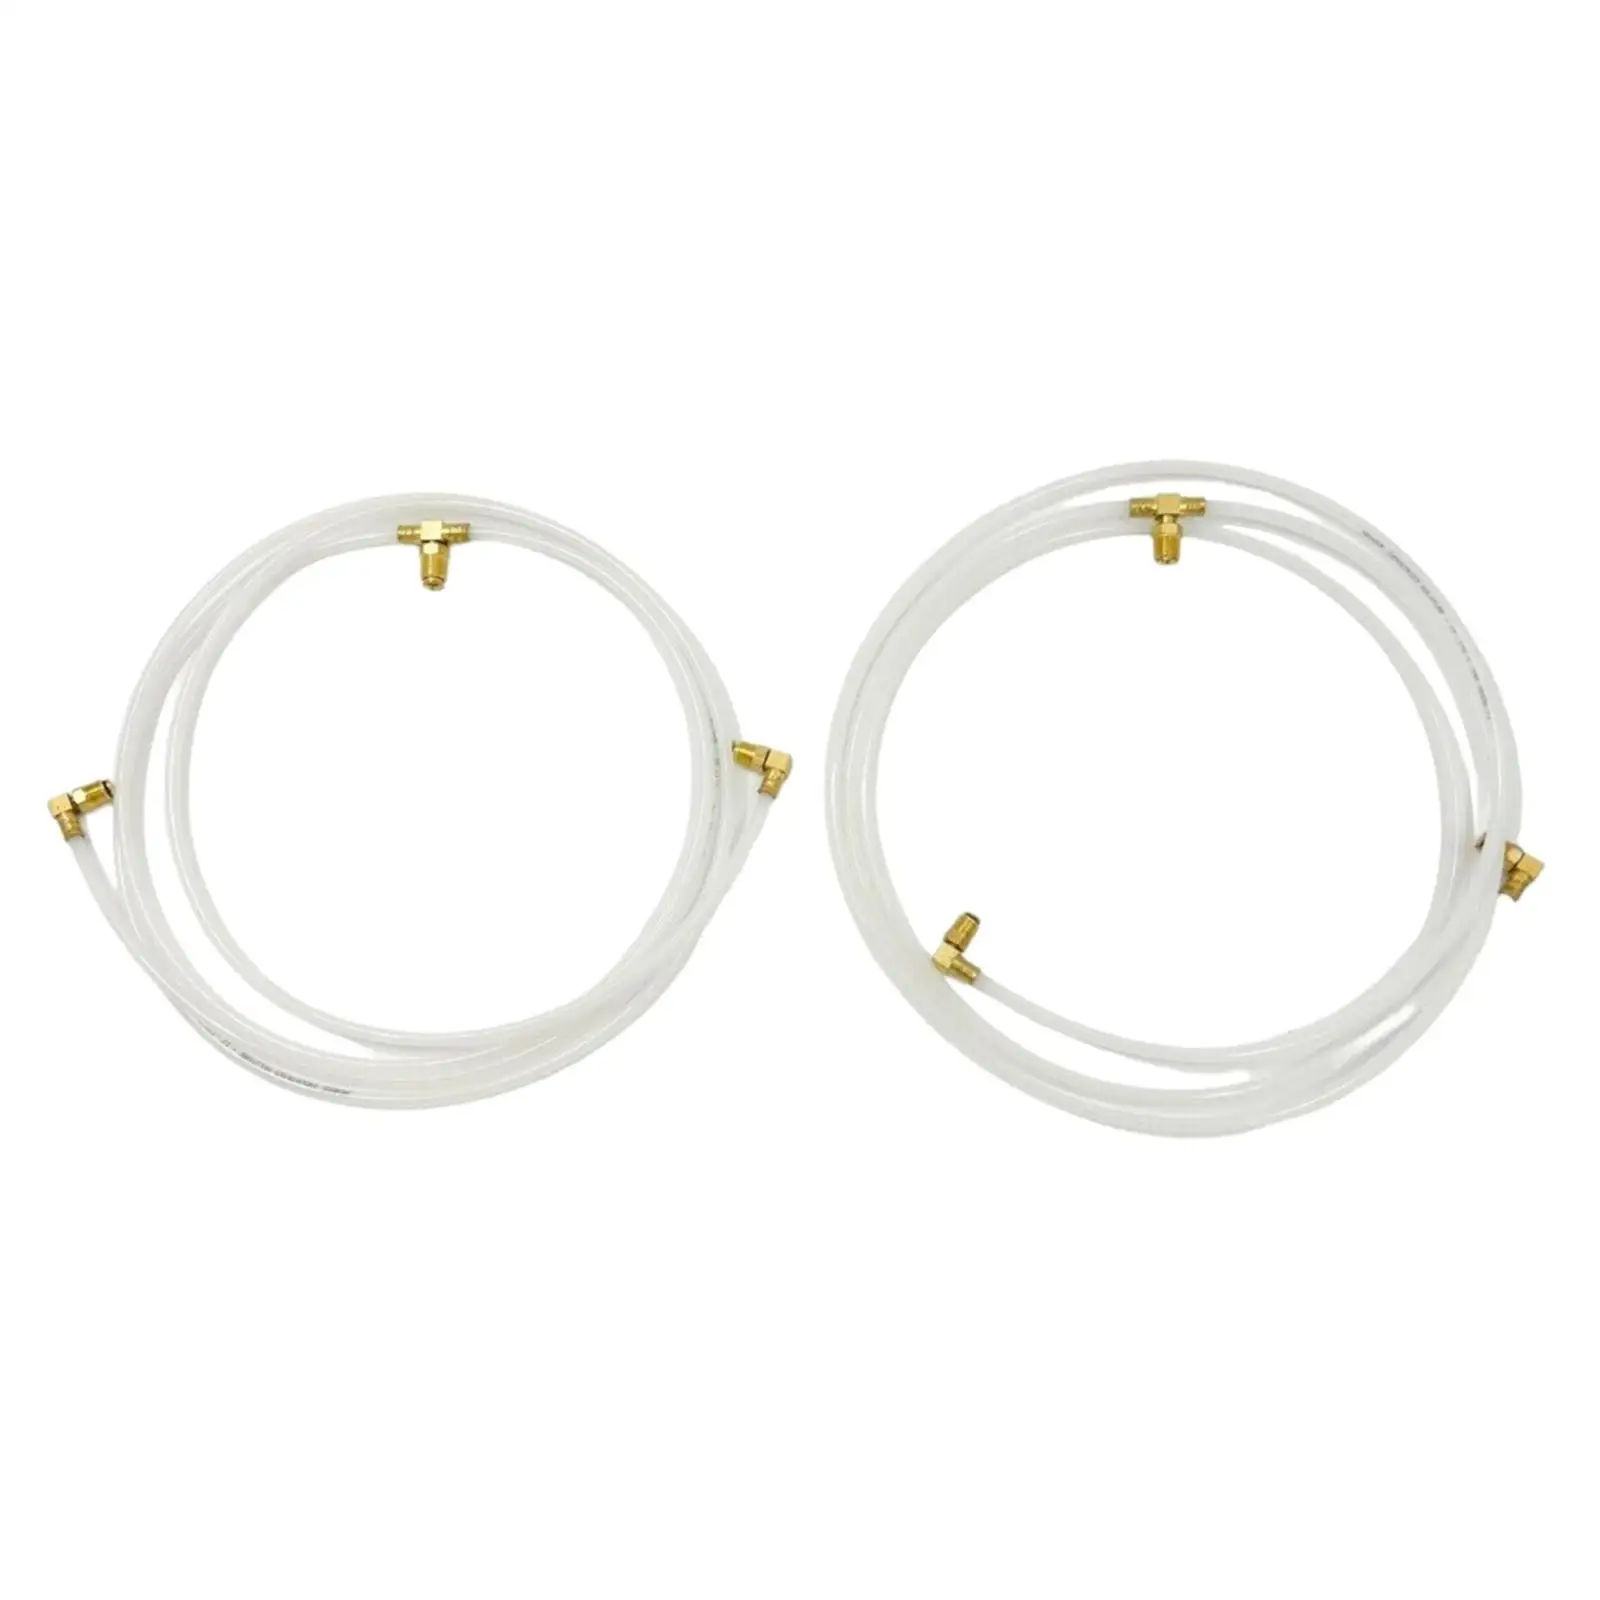 Convertible Top Hydraulic Fluid Hose Line Convertible Top Hose Set Pair Hoses for Chevrolet Corvair Chevy II Impala Quality